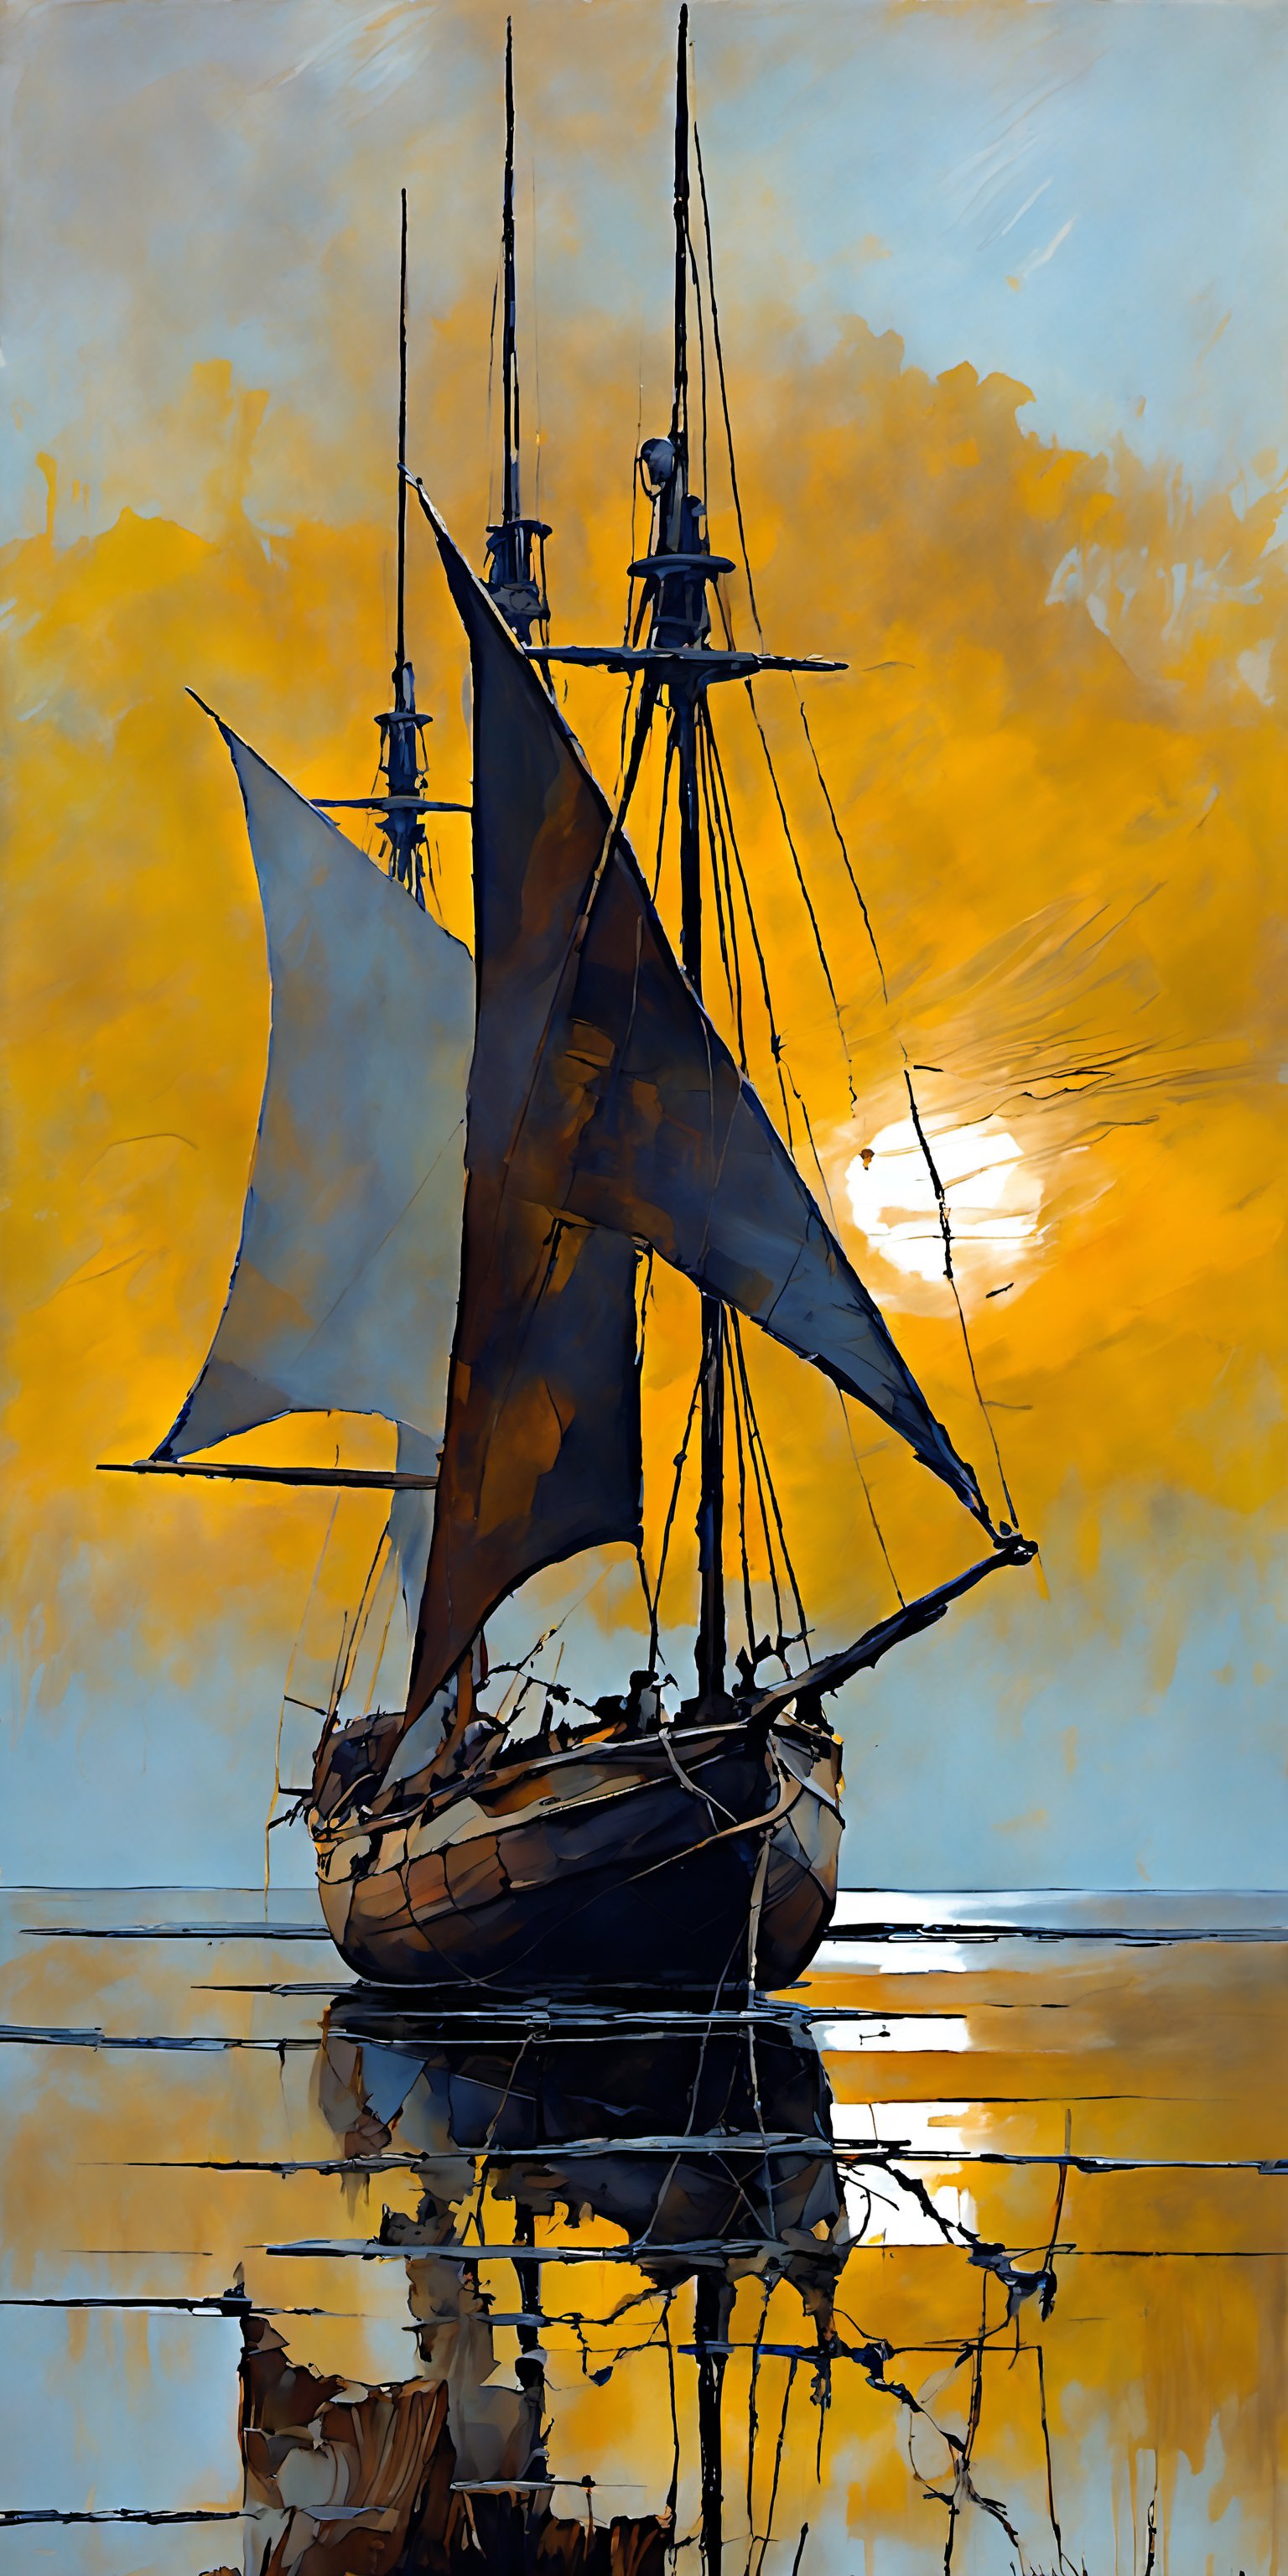 "The overall effect is a blend of impressionism and abstraction, creating a rich, immersive setting that complements the sharp focus on the massive sailboat in the foreground. This sailboat, weathered by time and the elements, stands as a testament to endurance and exploration. The scene should feature an impressionist sharp focus on the sailboat, highlighting its tattered sails and worn hull. In contrast, the background should transition into an abstract, painterly environment. The atmosphere should be hazy and diffuse, contributing to an ethereal and somewhat dystopian feel. Indistinct forms and shapes in the background should suggest several other ships and a few shadowy figures, rendered in a loose, impressionistic style to emphasize mood and atmosphere over detailed realism. The colors in the background should include shades of rich, vibrant hues with dramatic contrasts, featuring deep, earthy tones and vivid highlights, blending seamlessly with cooler hues like blues and greys. Use this blend of subdued and bold colors to emphasize the gritty nature of the scene. The overall scene should evoke a sense of quiet solitude and mystery, capturing the ethereal beauty and timeless quality of the weathered sailboat amidst an abstract, impressionistic landscape."